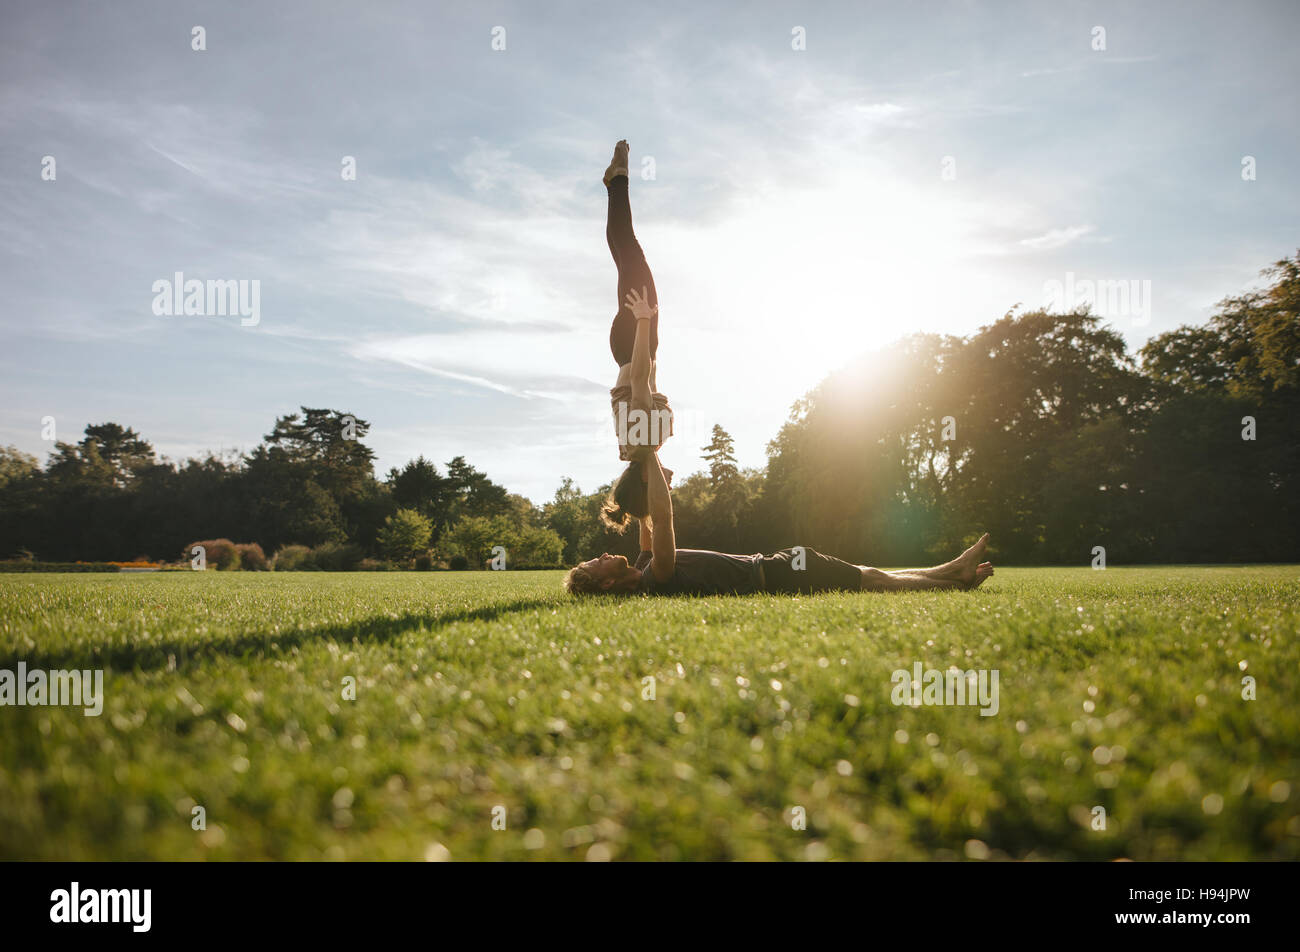 Healthy young couple doing pair yoga outdoor in park. Man lifting and balancing woman in park. Stock Photo